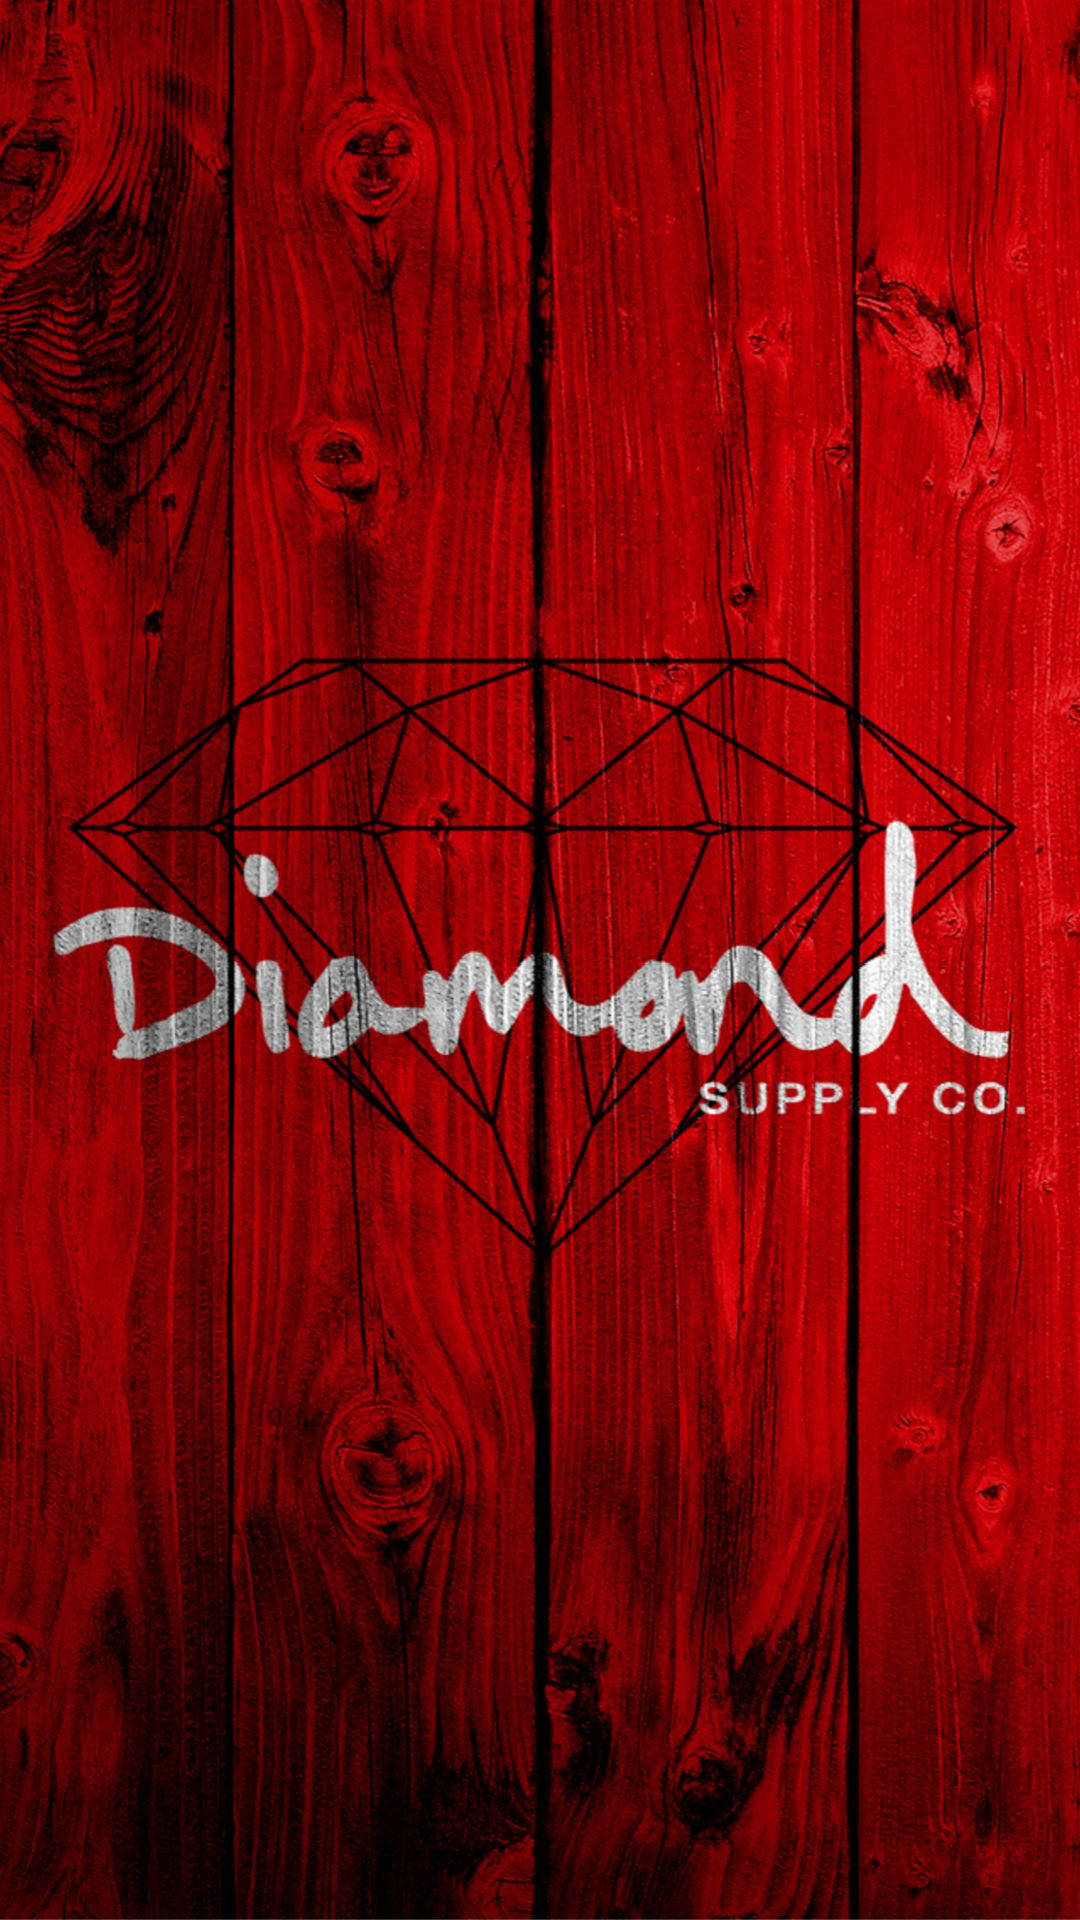 Diamond Supply Co Red Wood Background